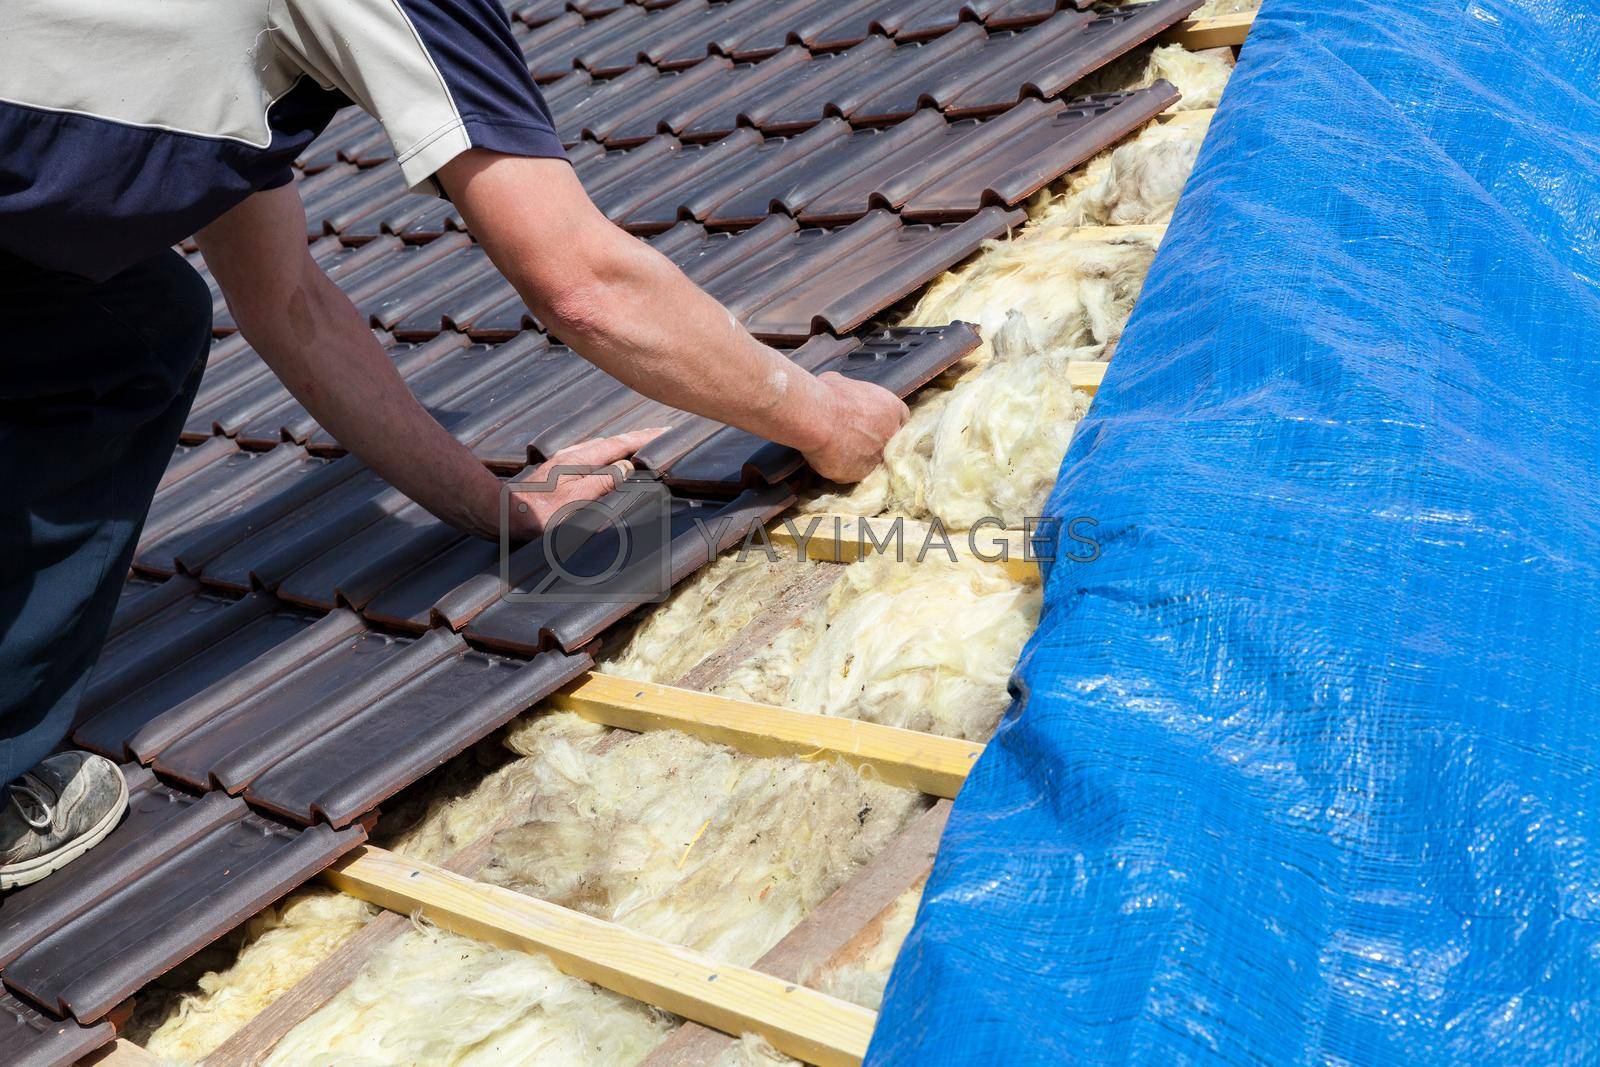 Royalty free image of a roofer laying tile on the roof by jp_chretien